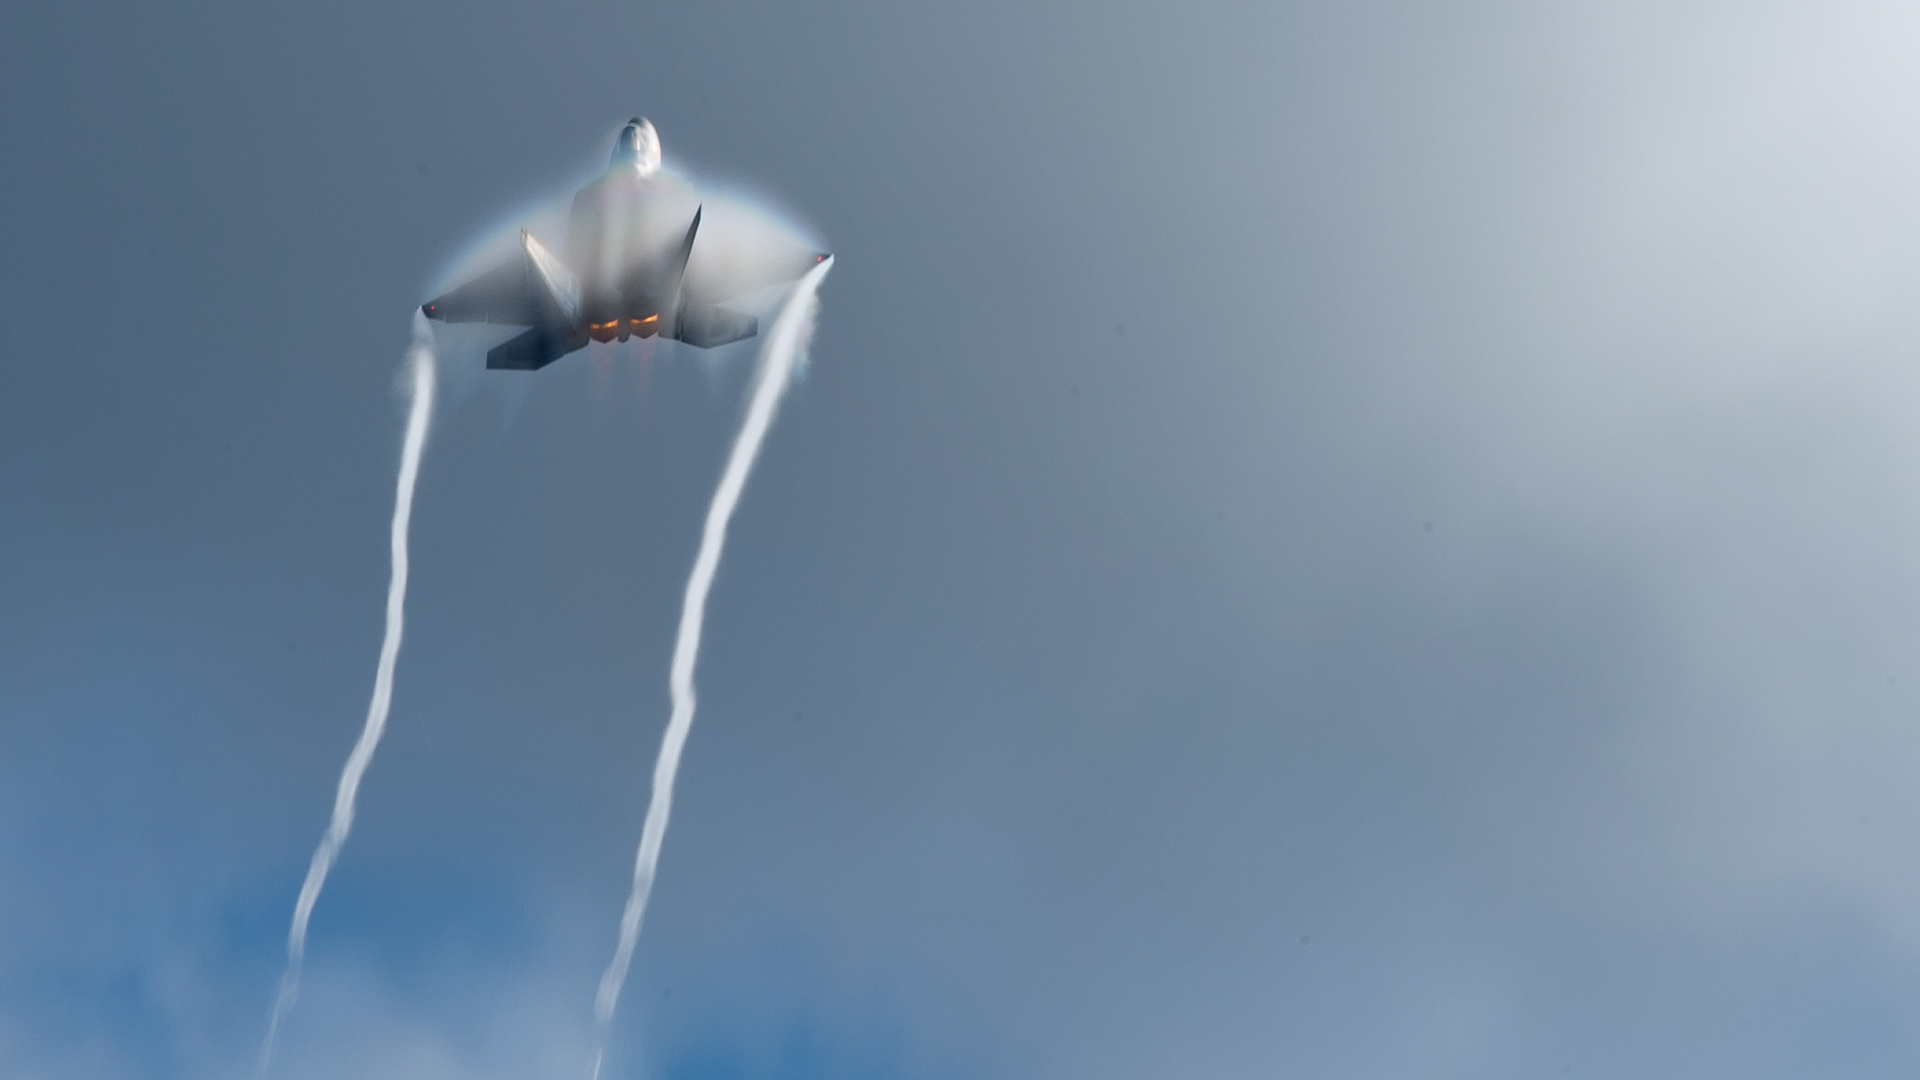 Jet Fighter Military Aircraft Weapon F 22 Raptor 1920x1080